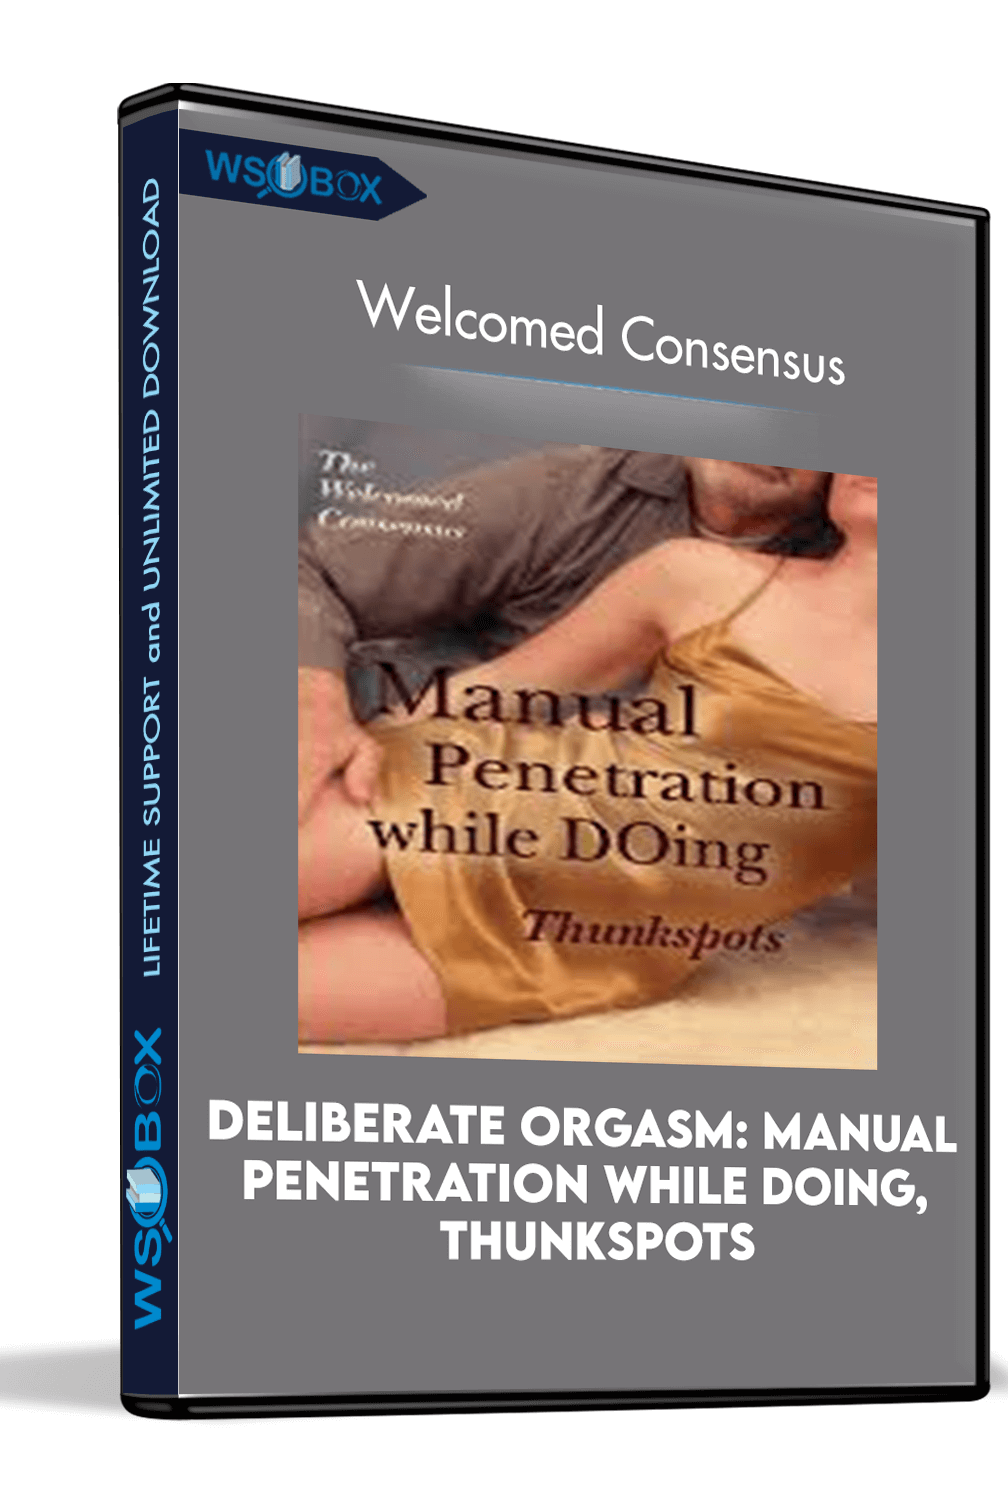 deliberate-orgasm-manual-penetration-while-doing-thunkspots-welcomed-consensus